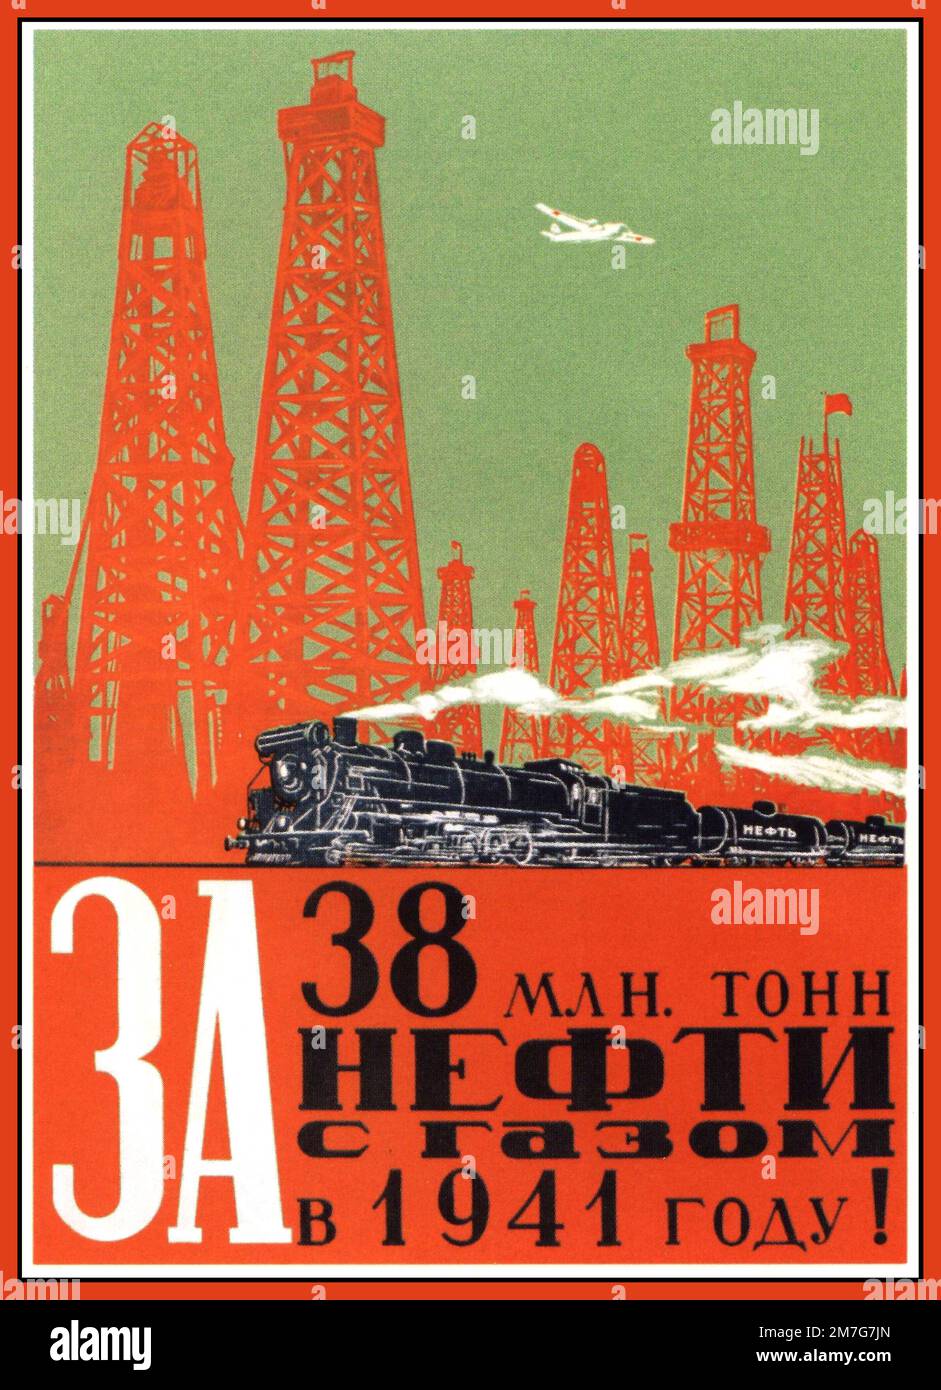 WW2 Soviet Russian Propaganda Poster "For 38 million tons of oil and gas in 1941!" USSR Industrial War output. Artist Pavel Gorely ( Goreliy) Stock Photo